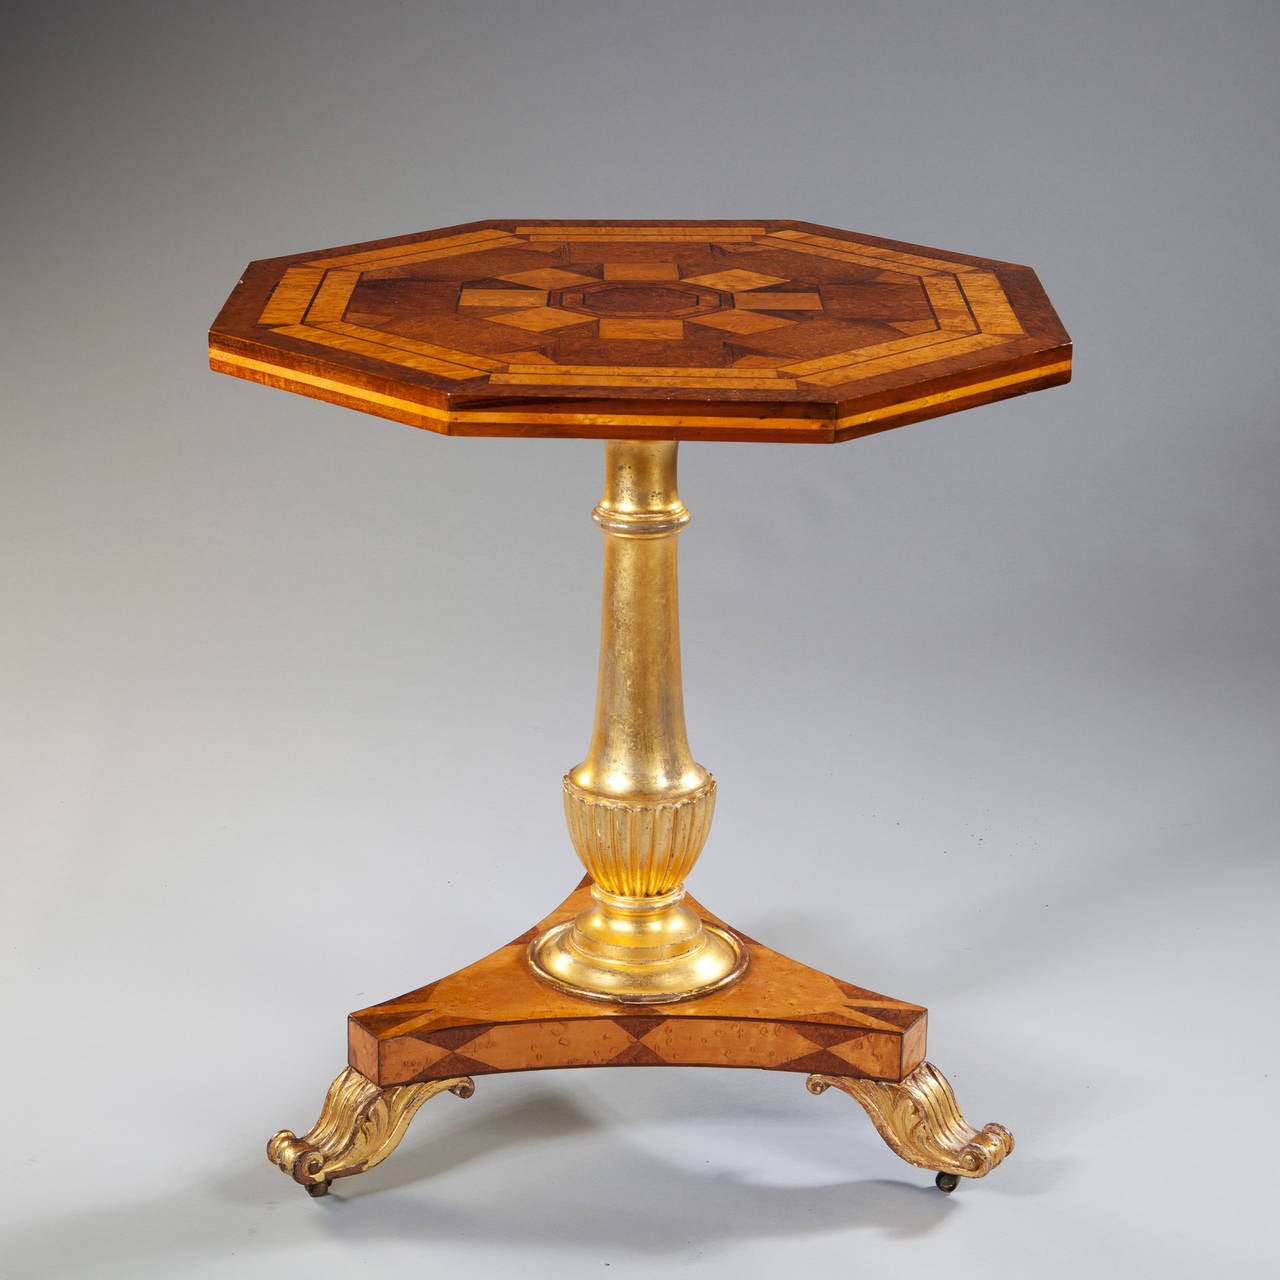 A very fine marquetry tilt top octagonal table, the geometric marquetry top inlaid with fine veneers of birds eye maple, walnut, mahogany and yew wood, raised on a gilt column and standing on a three sided concave base with marquetry lozenges and